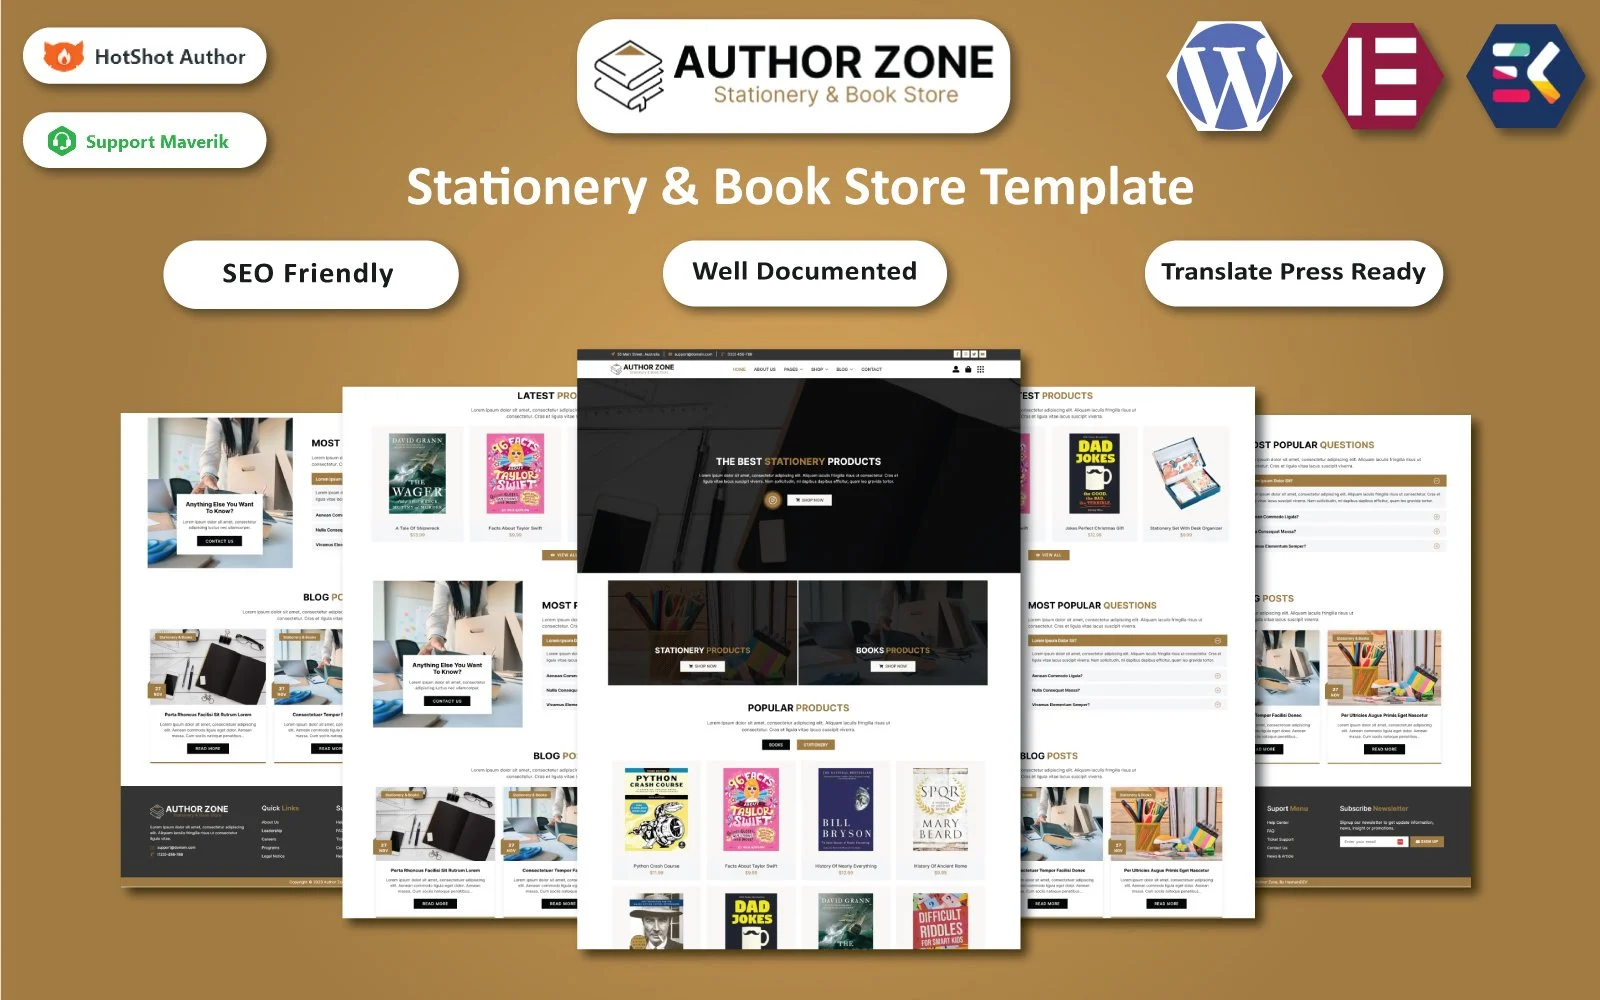 Author Zone – Stationery & Book Store